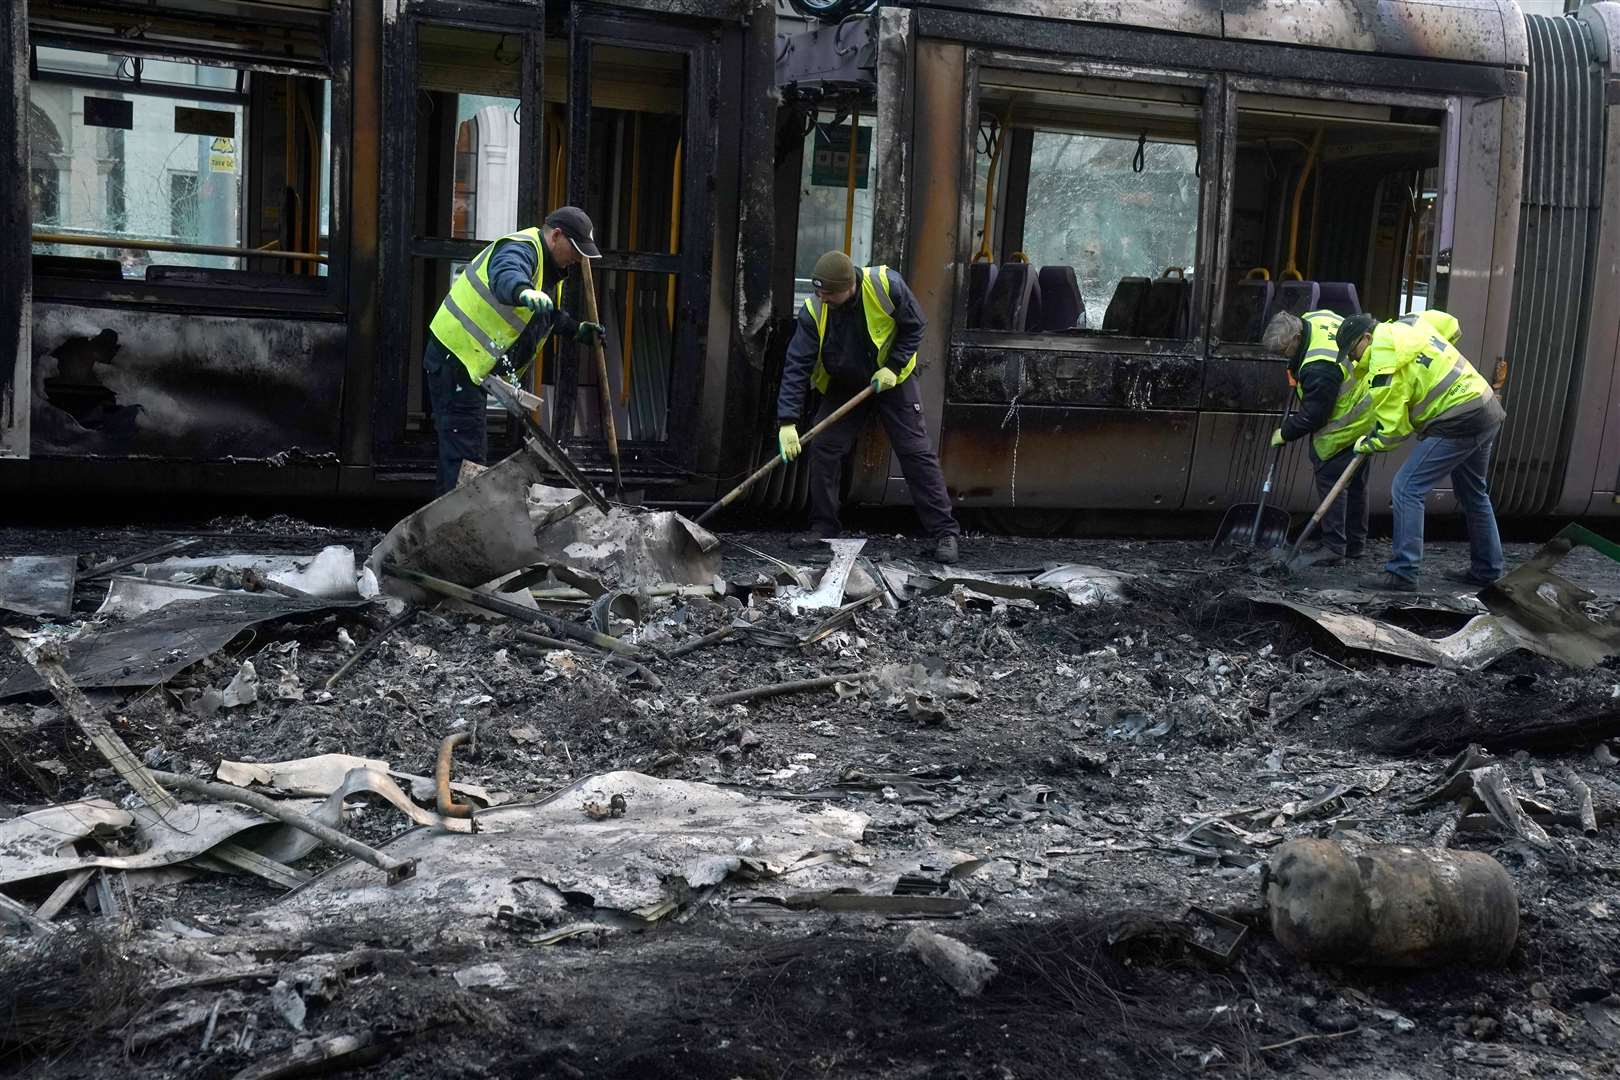 Debris is cleared from a burned out Luas and bus on O’Connell Street (Brian Lawless/PA)